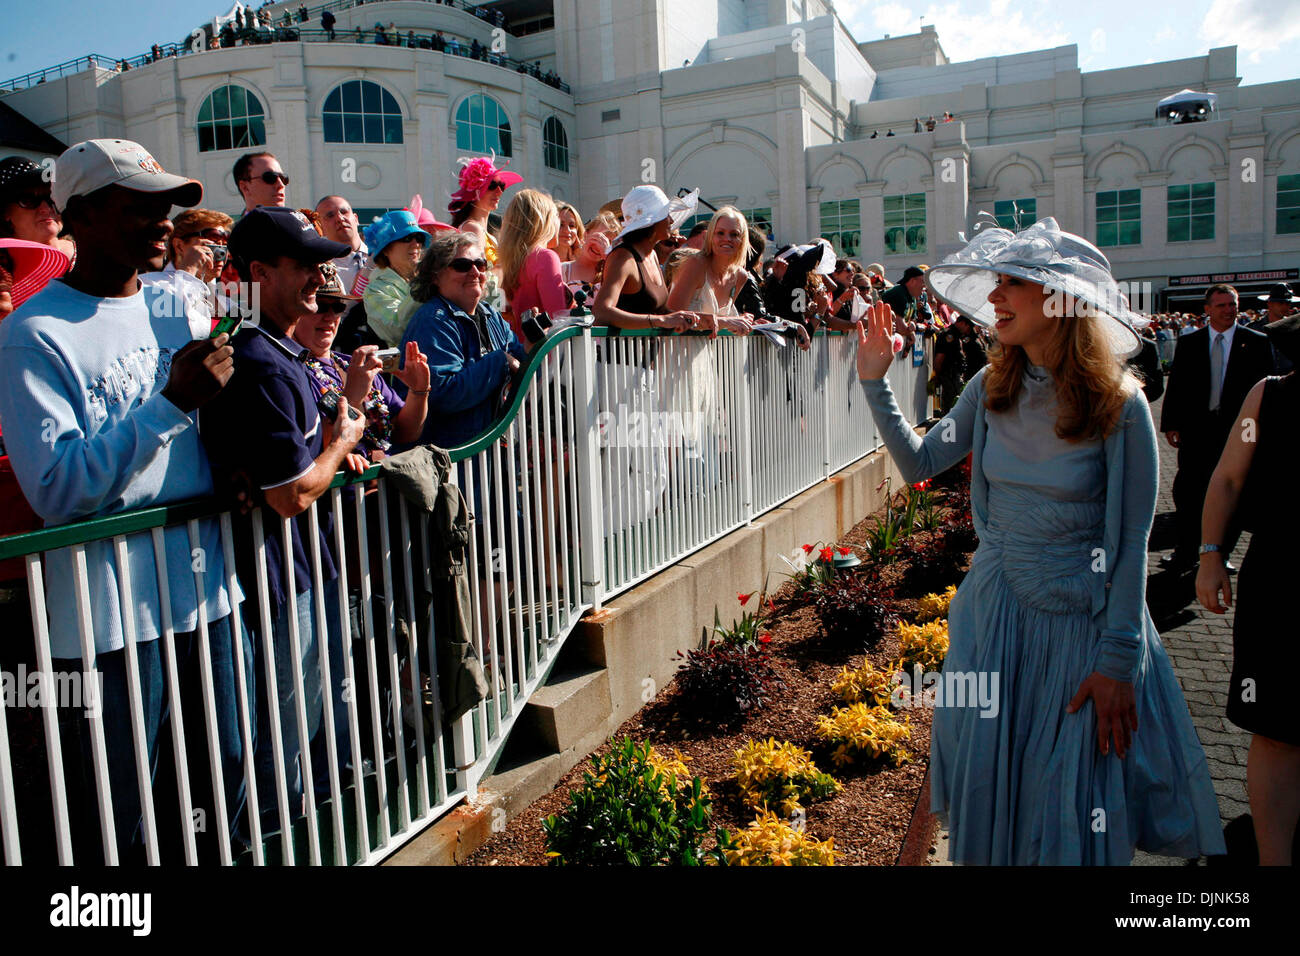 Chelsea Clinton talks with spectators in the paddock before the 134th running of the Kentucky Derby Saturday May 3, 2008, at Churchill Downs, Louisville, Ky. Photo by Ron Garrison  (Credit Image: © Lexington Herald Leader/ZUMA Press) Stock Photo